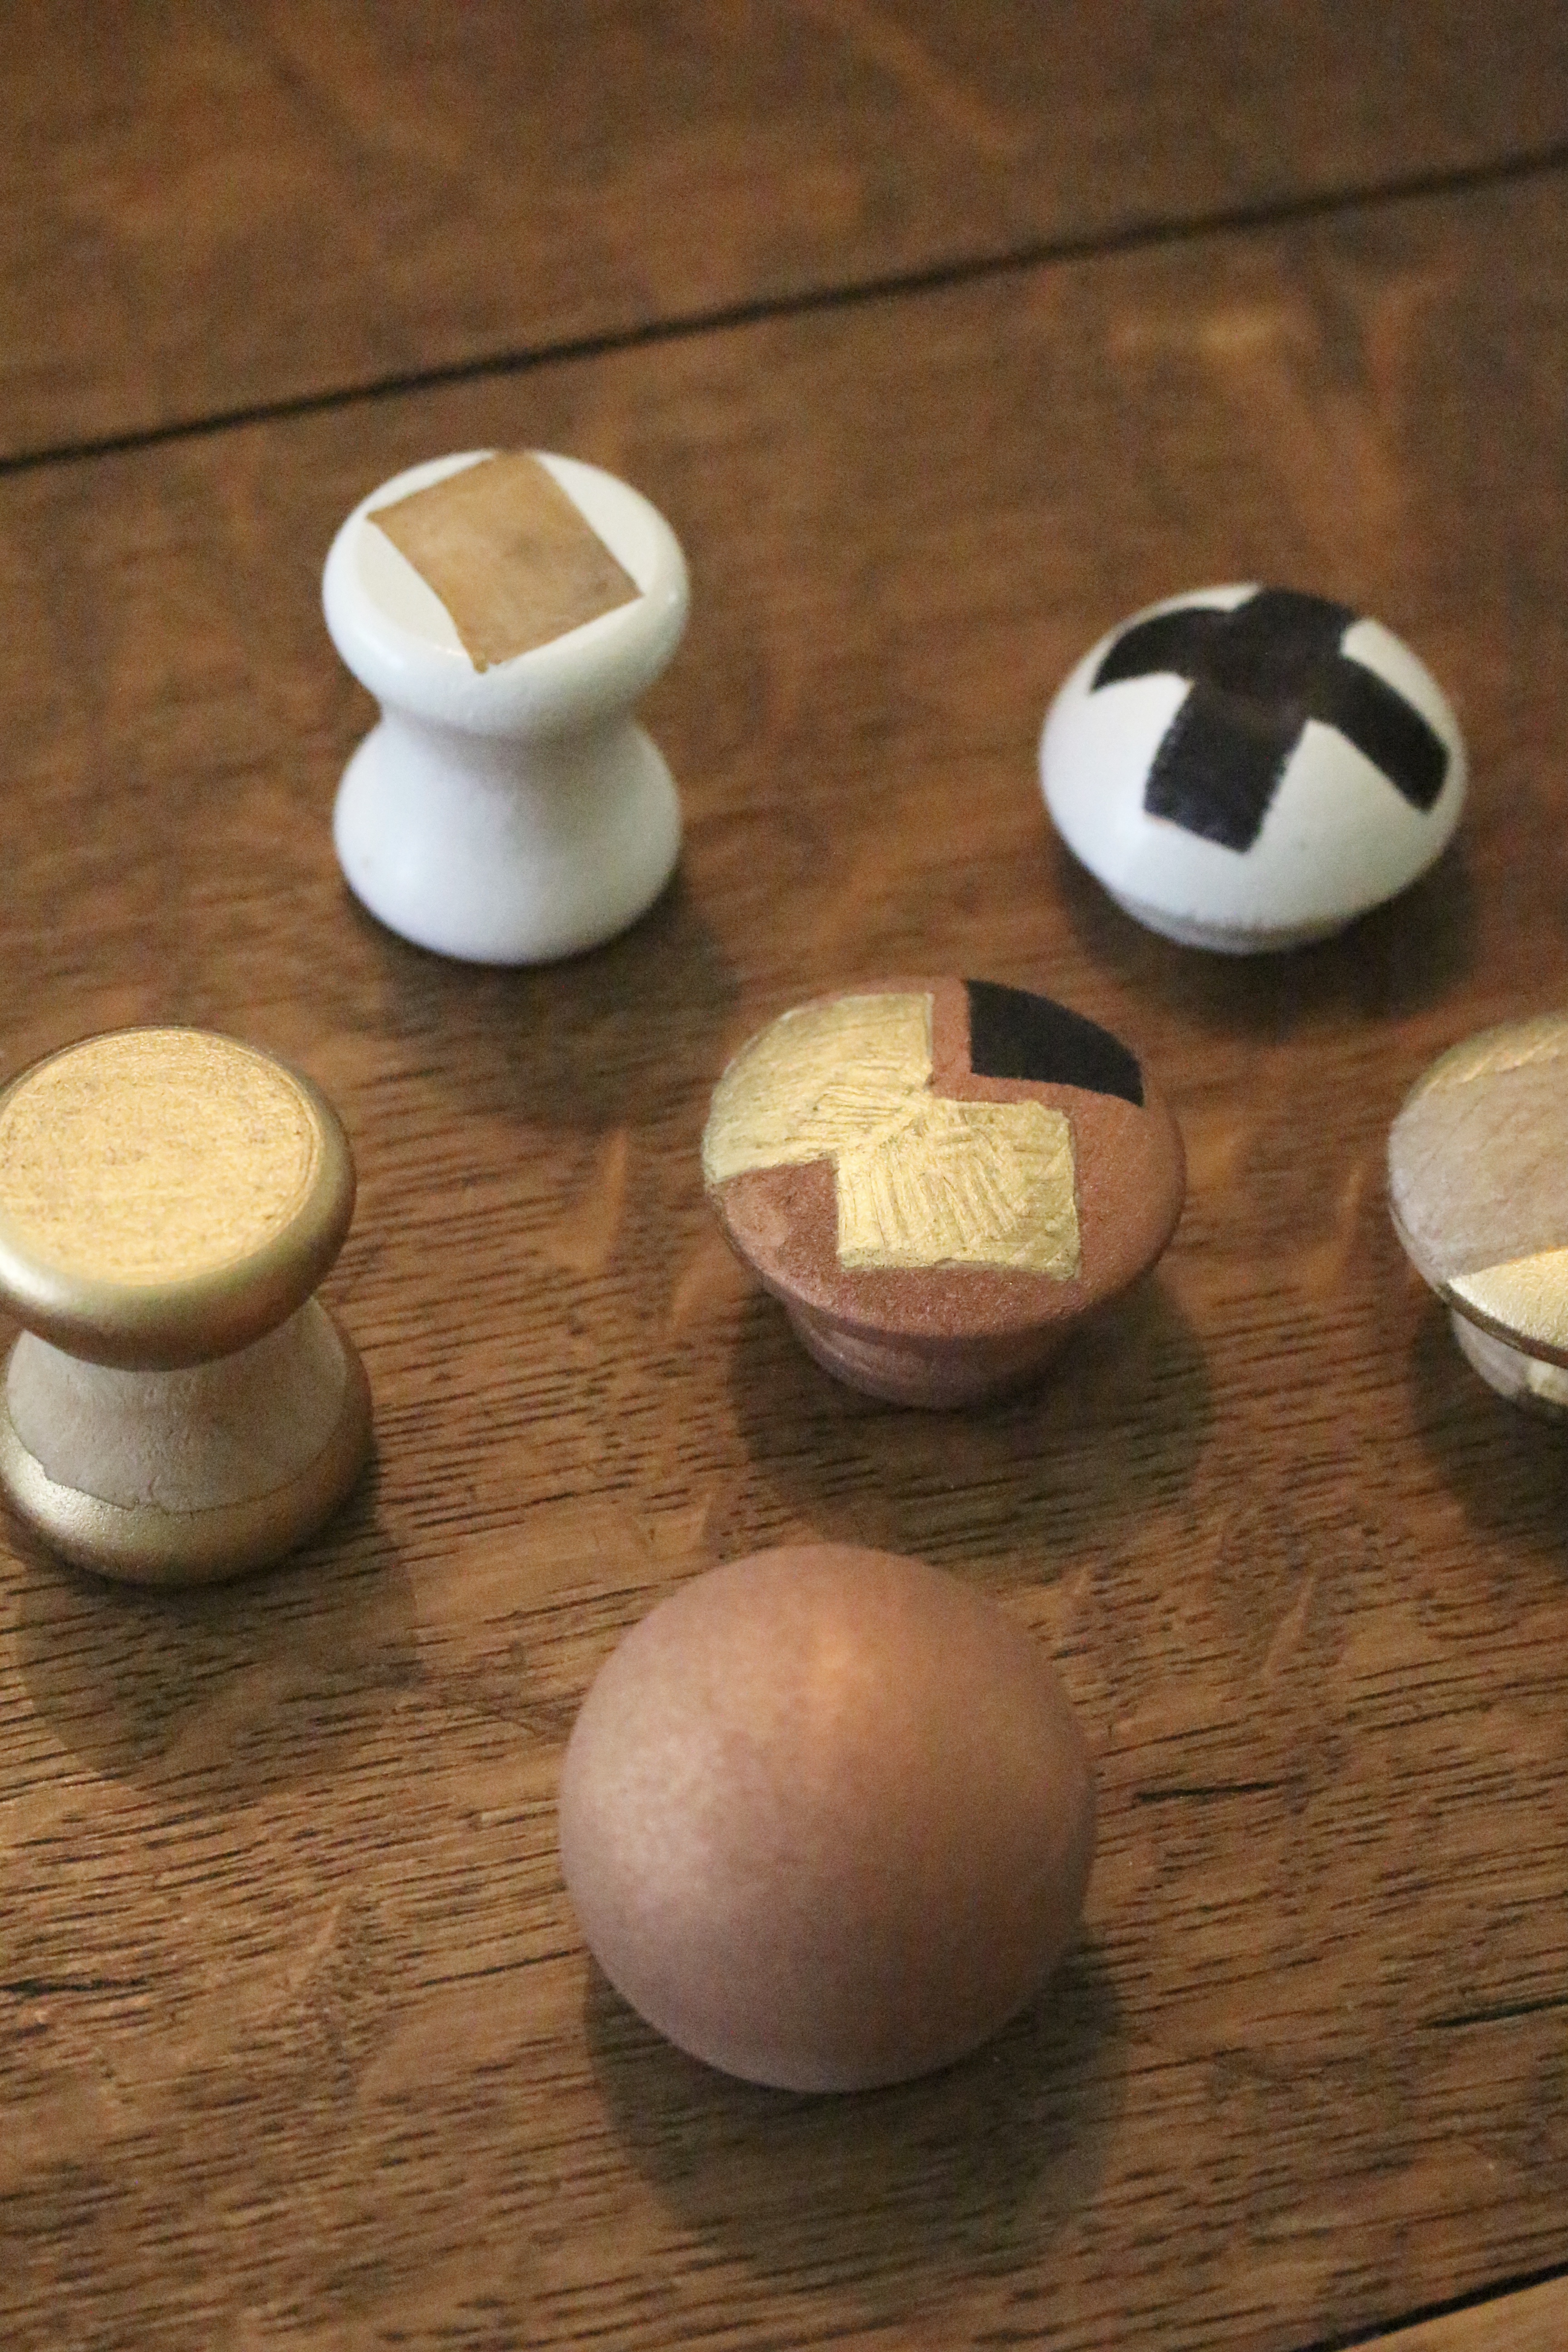 Magnets made from wooden knobs, metallic spray paint, magnets, geometric magnets, wooden knobs, refrigerator magnets, metallics, painted knobs, wooden, DIY designer magnets